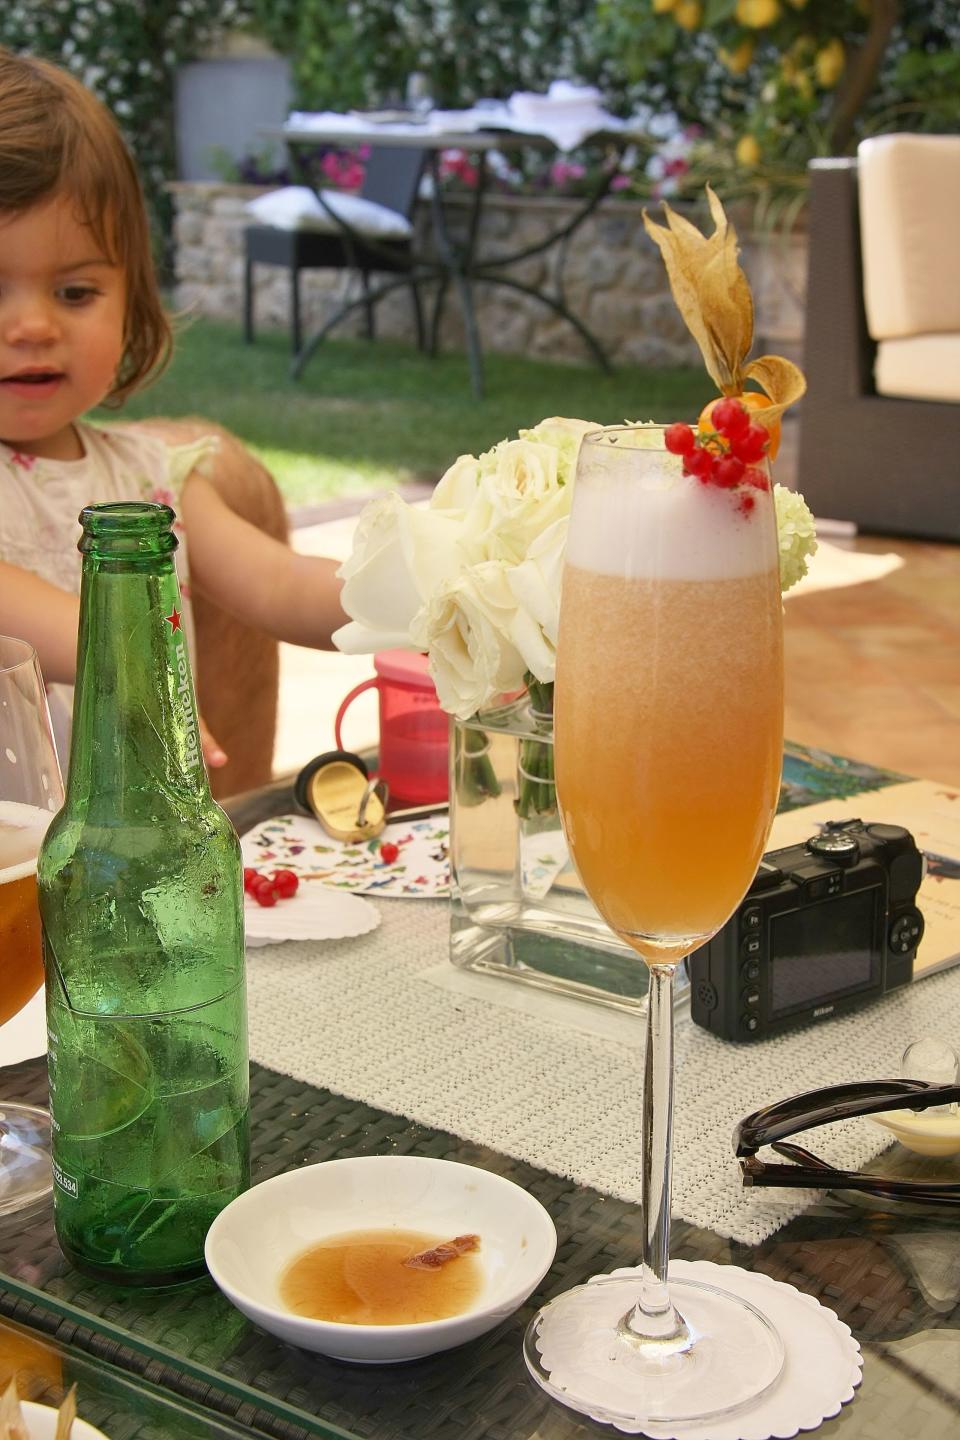 <p><strong>Bellini</strong></p><p>"A curious combo of prosecco and pureed peaces. The Bellini has been a growing favorite amongst sophisticated brunchers since its arrival to New York from Venice."</p>